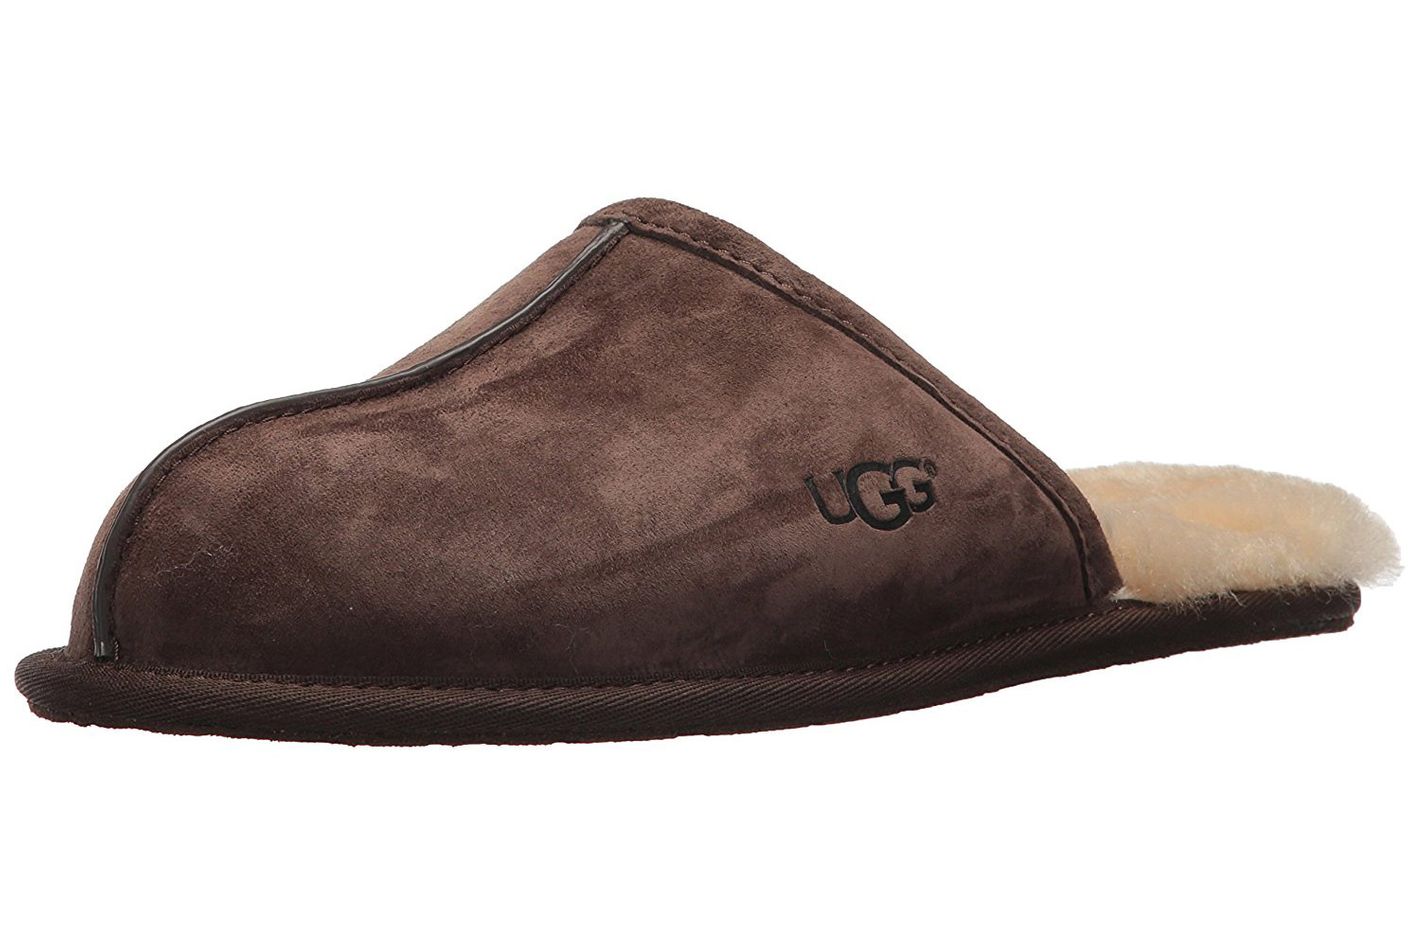 The 15 Best Men’s Slippers You Can Buy on Amazon 2019